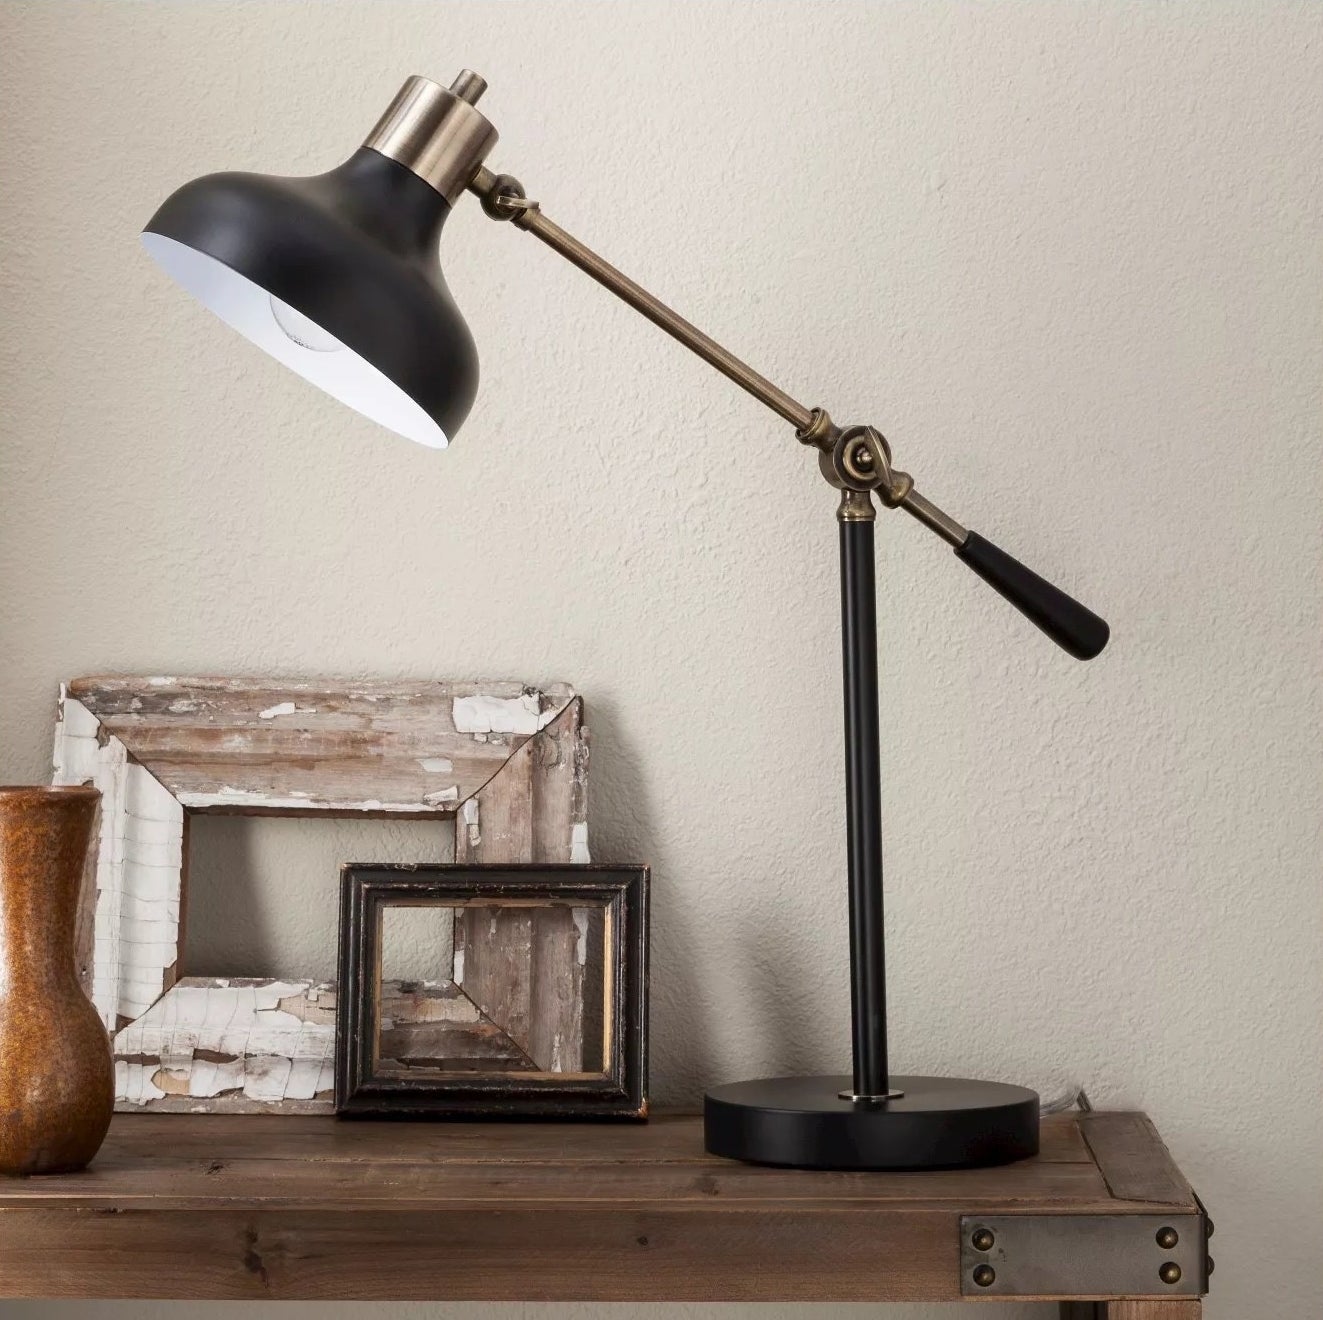 The lamp next to some items on a desk